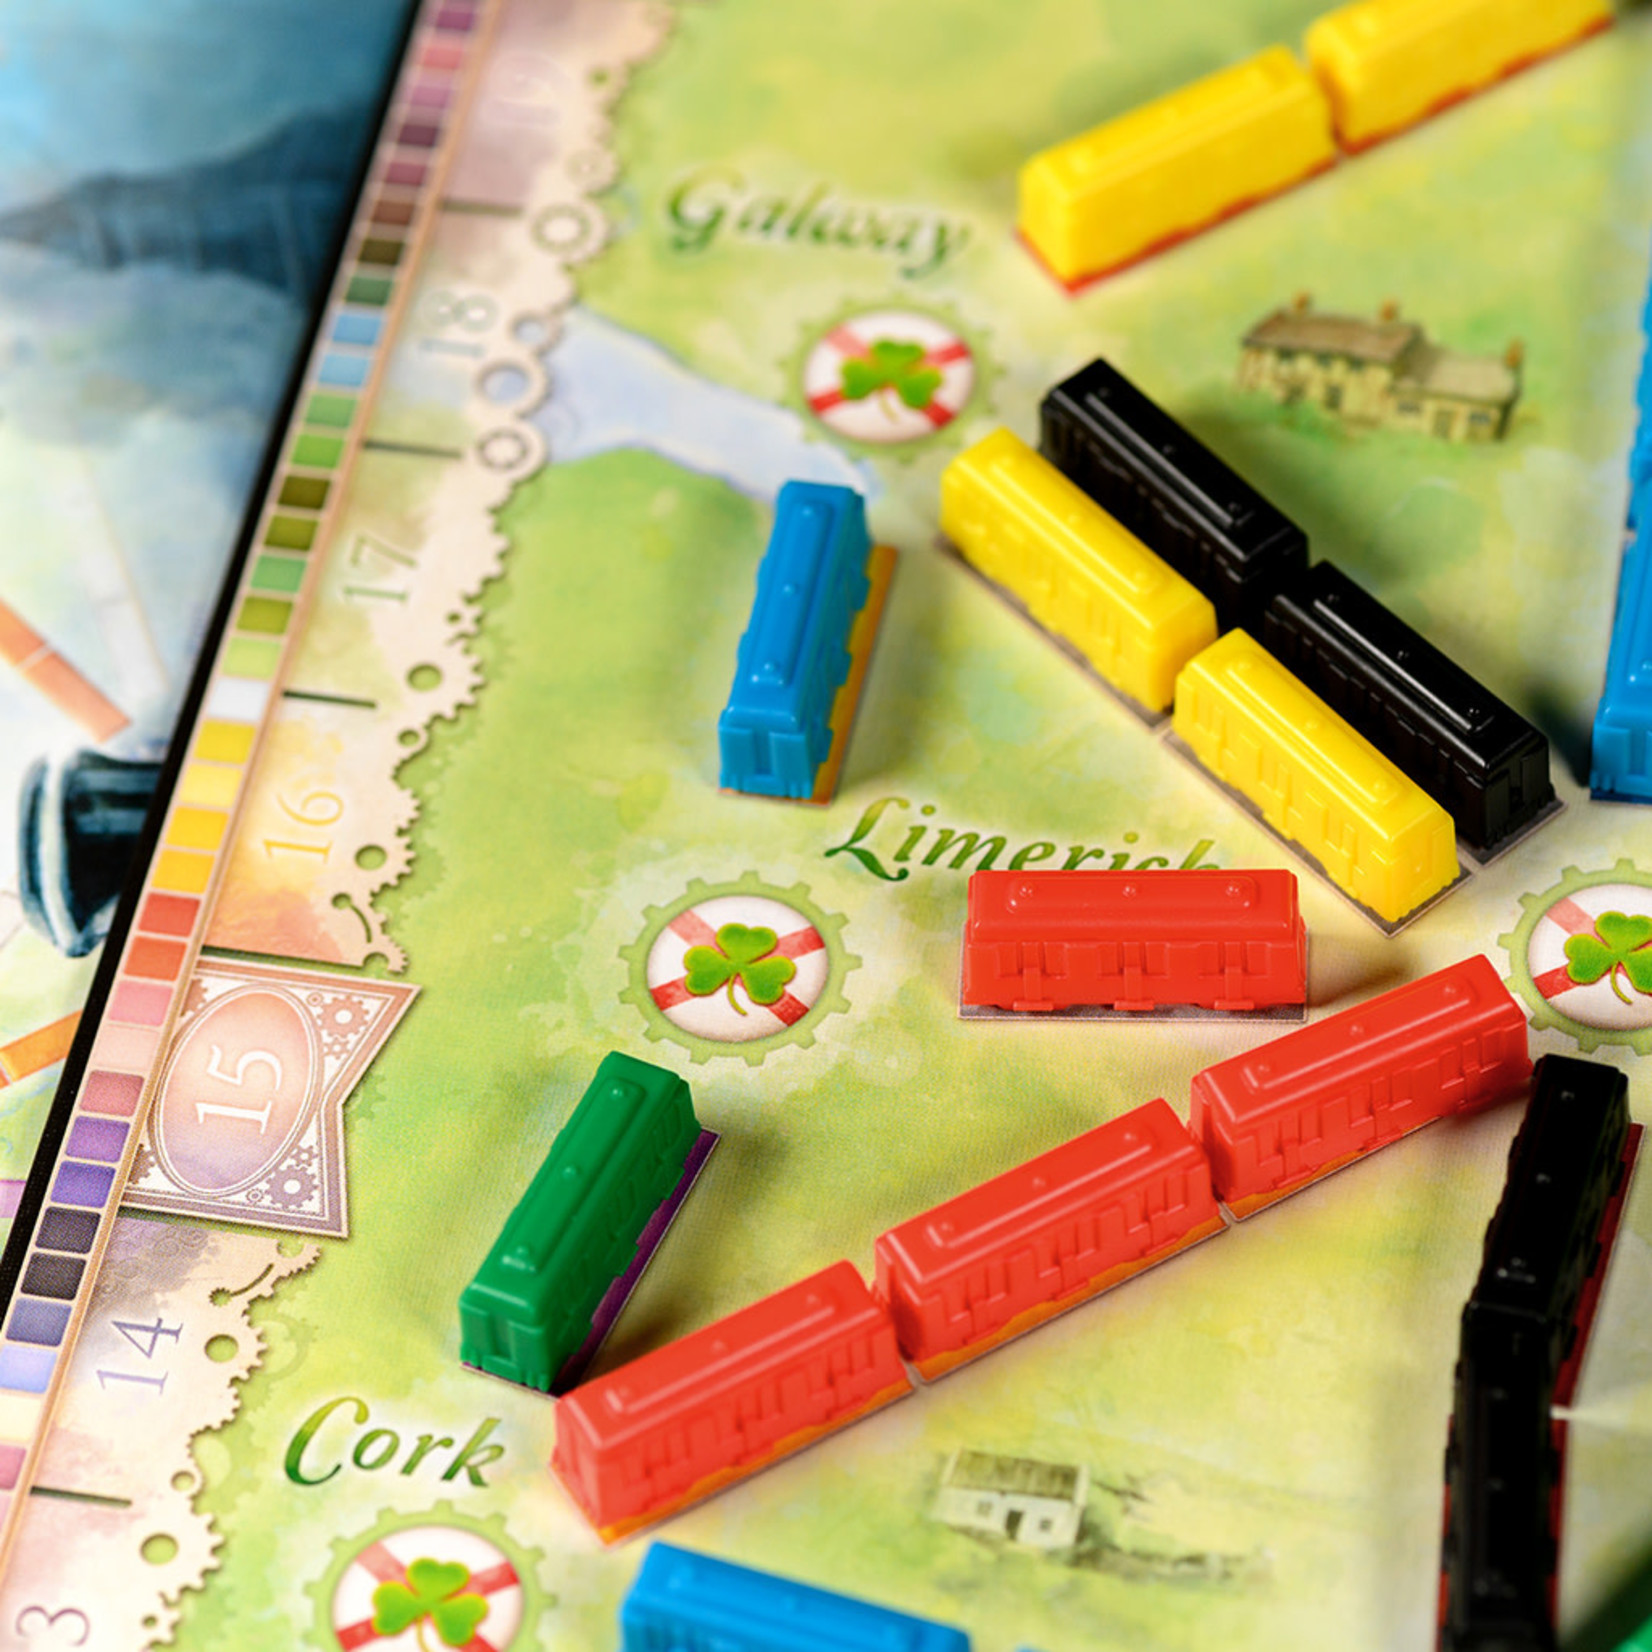 Days of Wonder Ticket to Ride: United Kingdom Expansion (Map Collection 5)